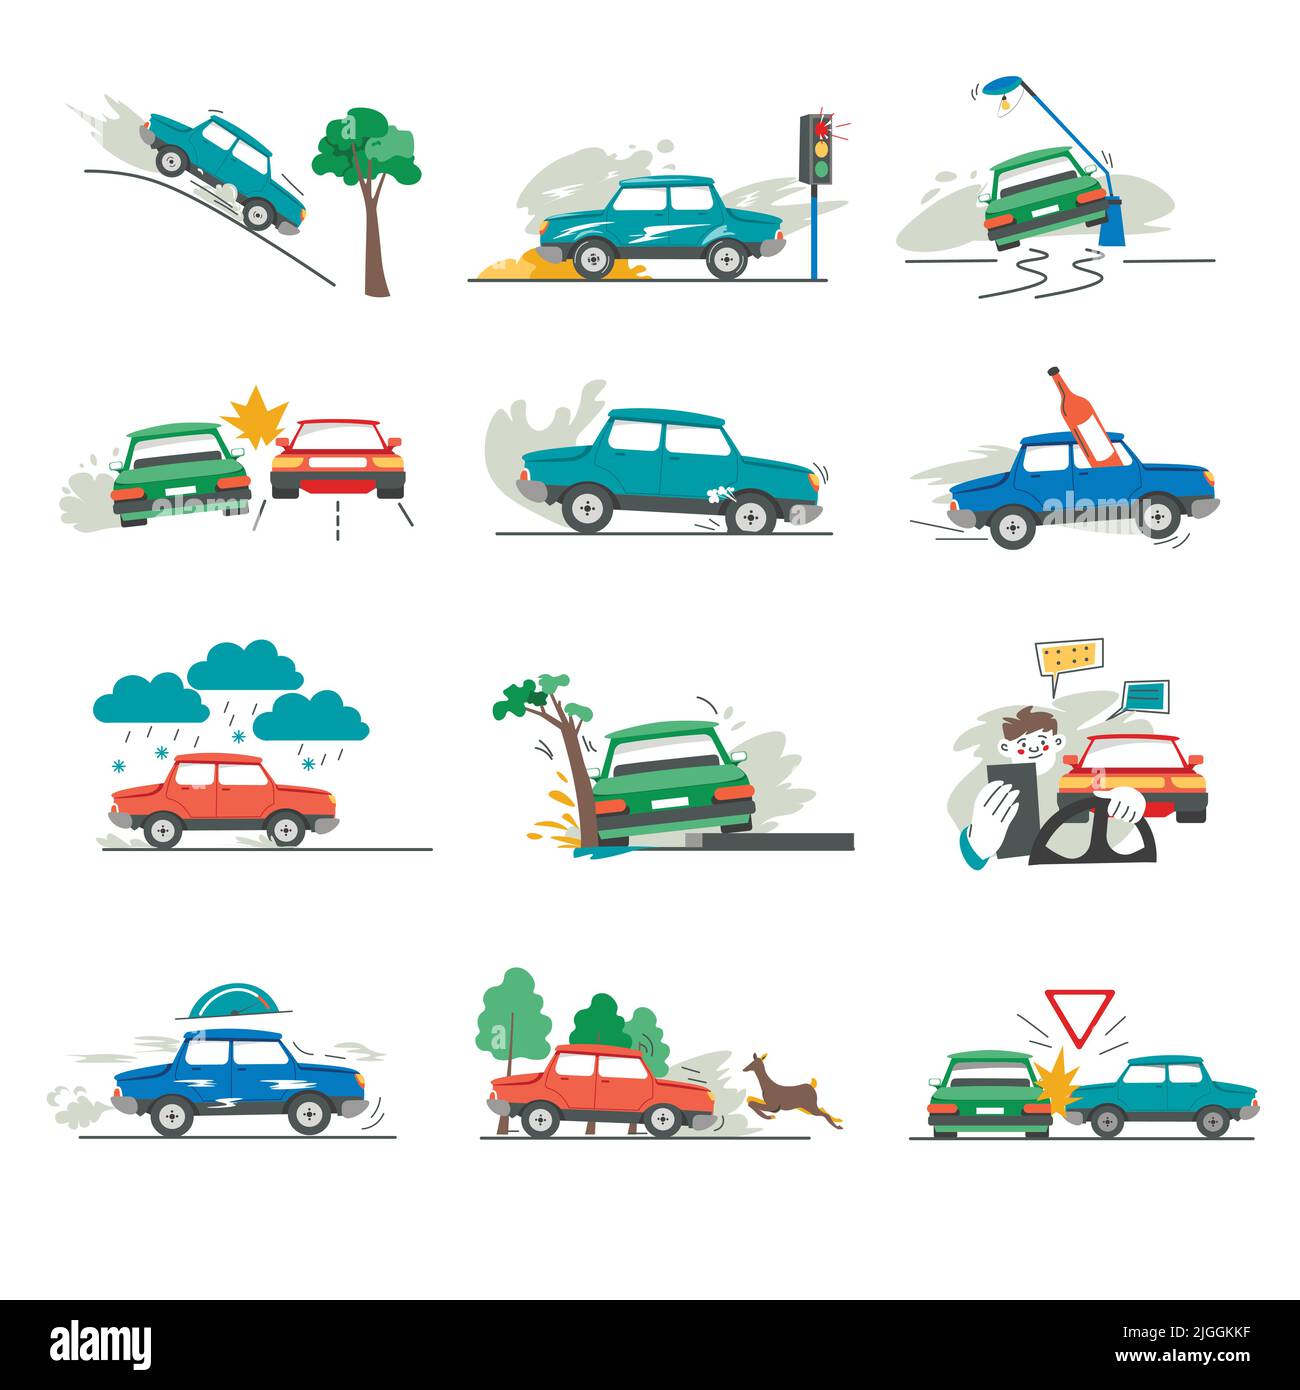 Car accident, crash damaged vehicle on road vector Stock Vector